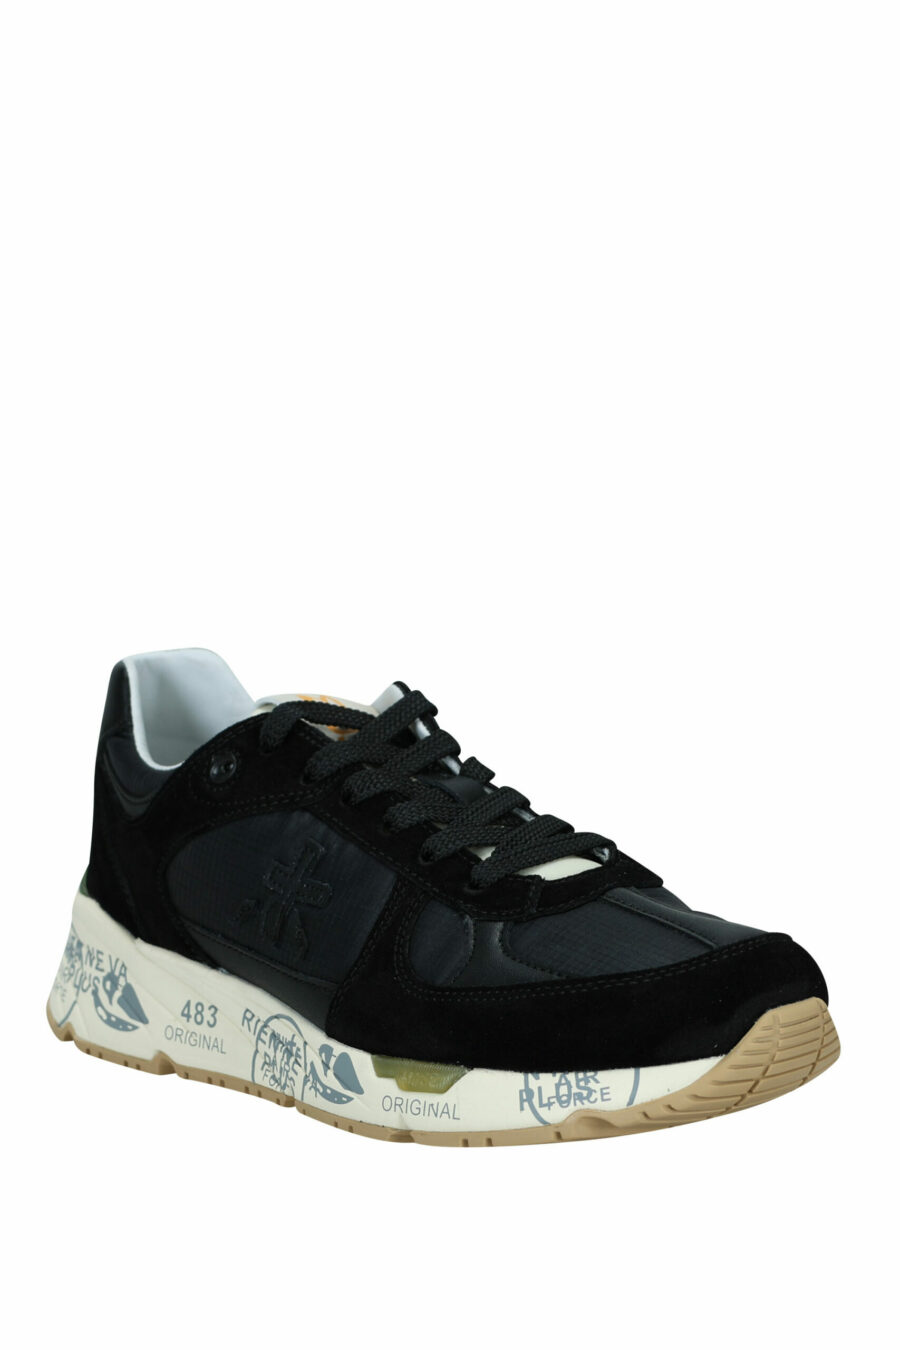 Black mix trainers with white sole "Mase 6624" - 8053680270159 1 scaled